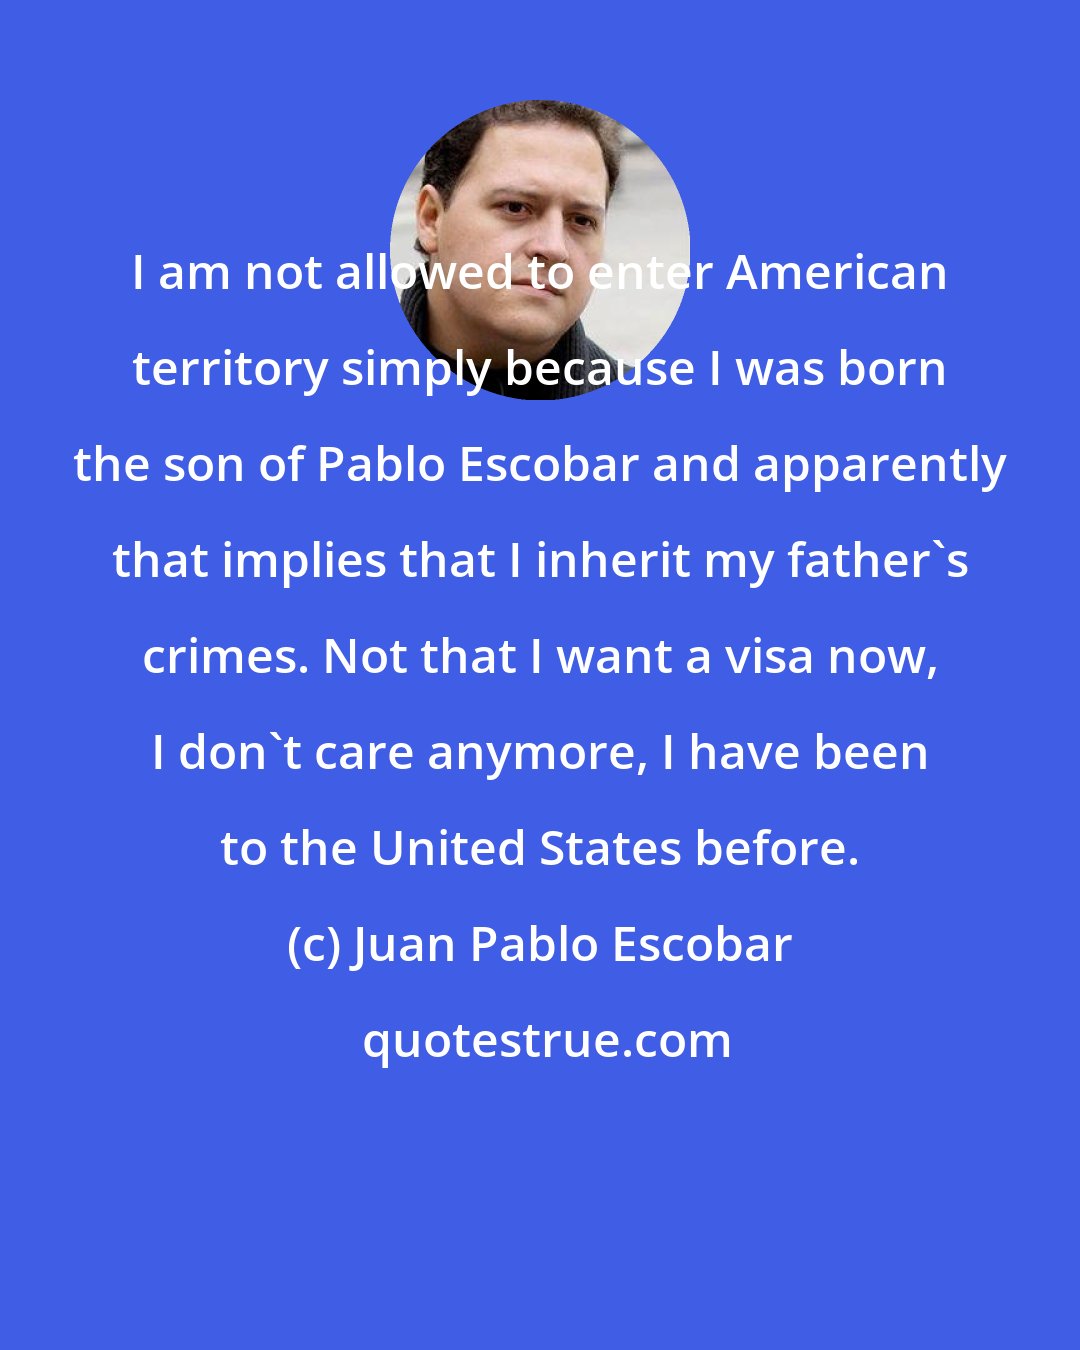 Juan Pablo Escobar: I am not allowed to enter American territory simply because I was born the son of Pablo Escobar and apparently that implies that I inherit my father's crimes. Not that I want a visa now, I don't care anymore, I have been to the United States before.